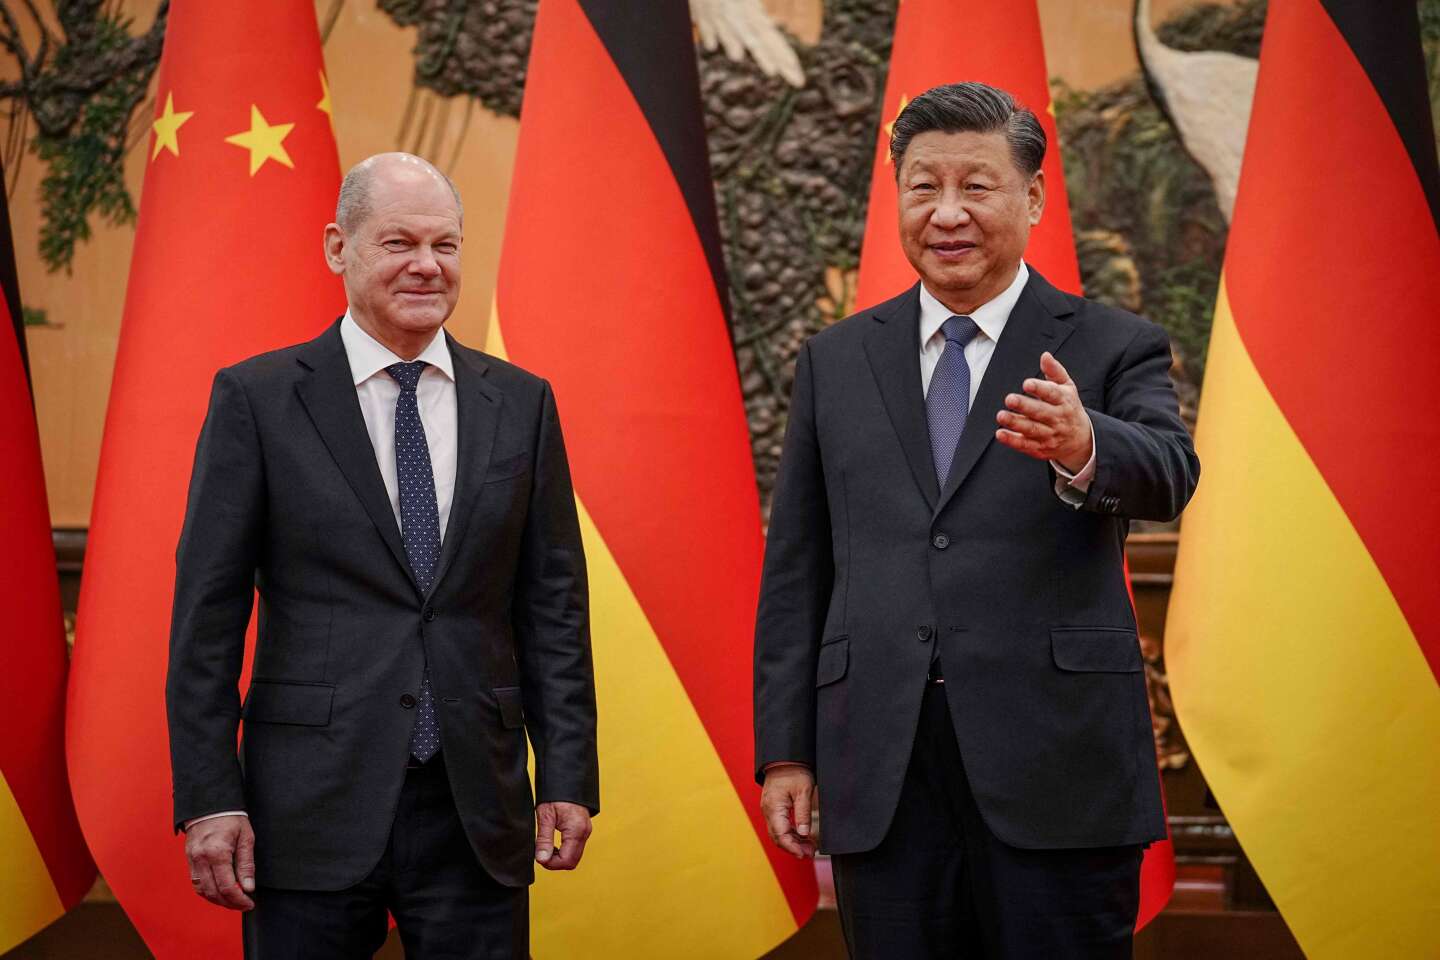 German chancellor Scholz discusses 'just peace' in Ukraine with China